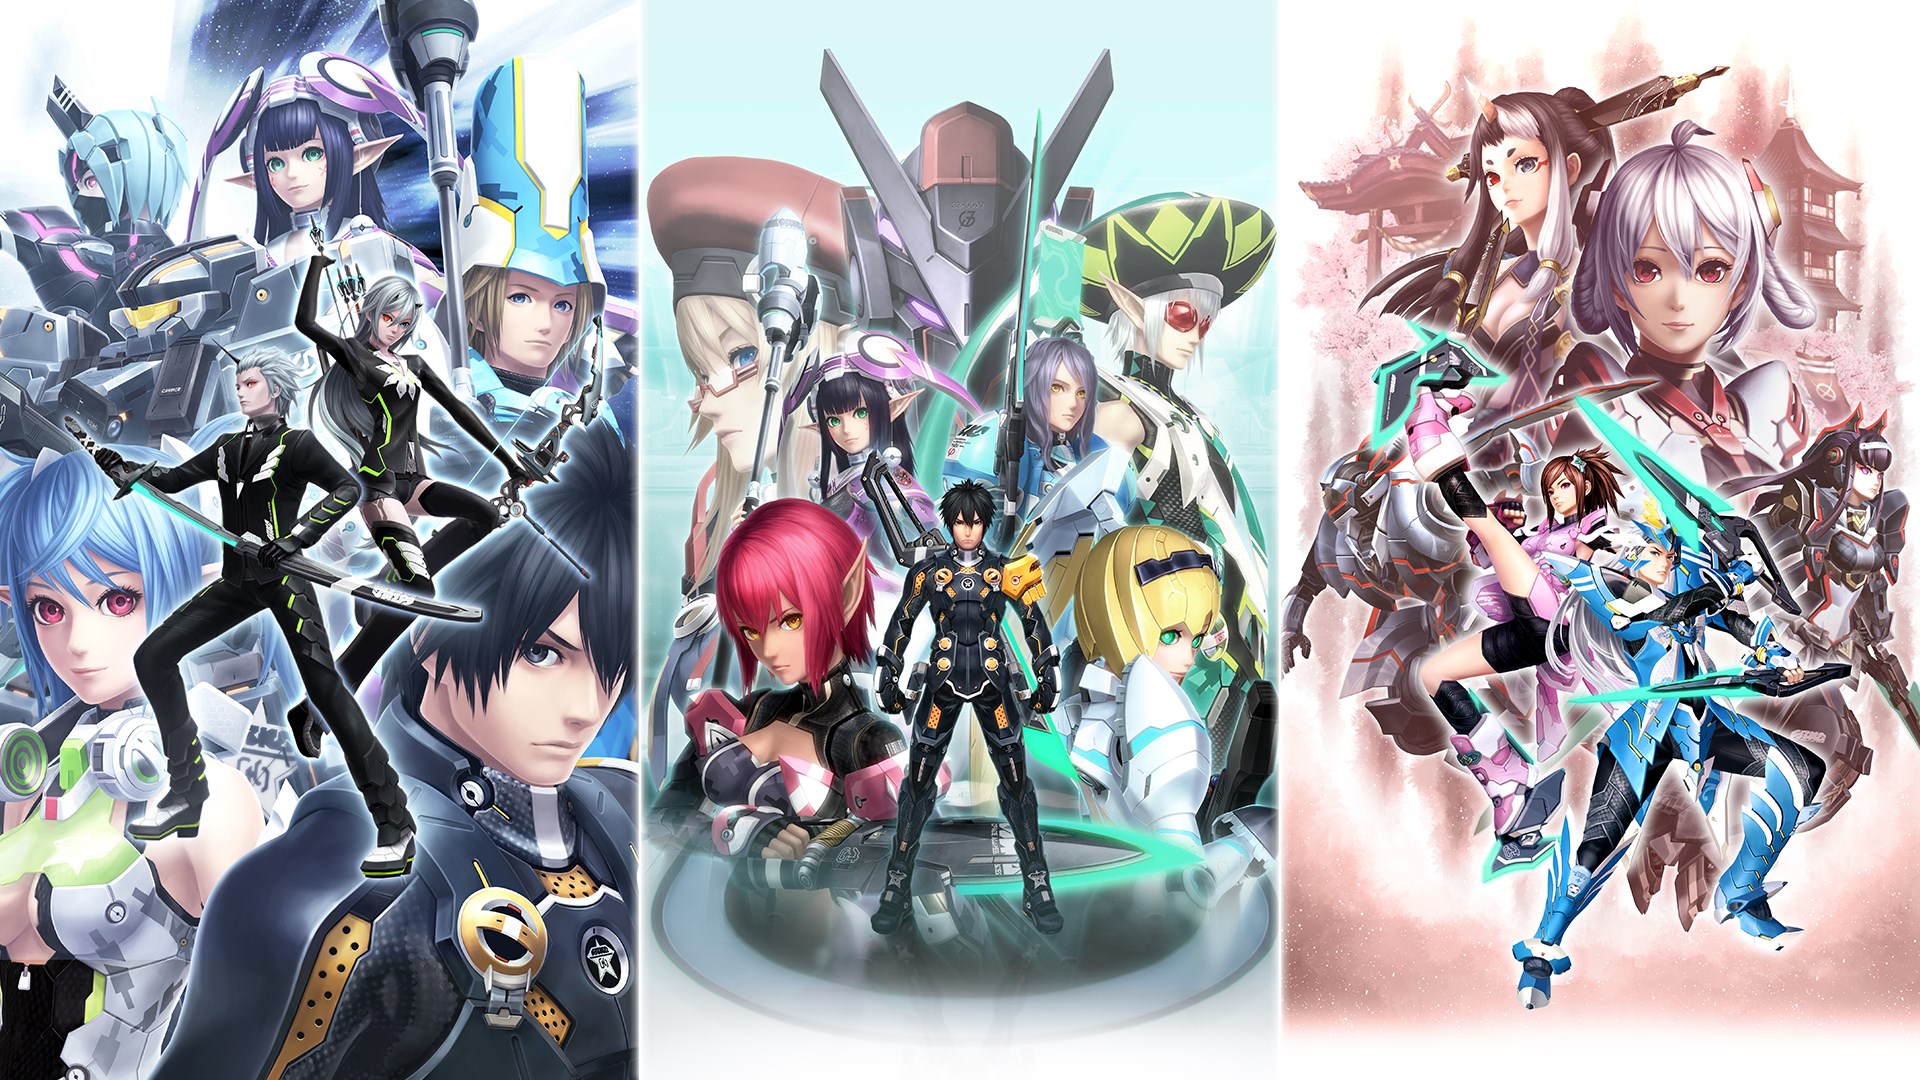 Phantasy Star Online 2 is a Microsoft Store exclusive on PC now on Xbox